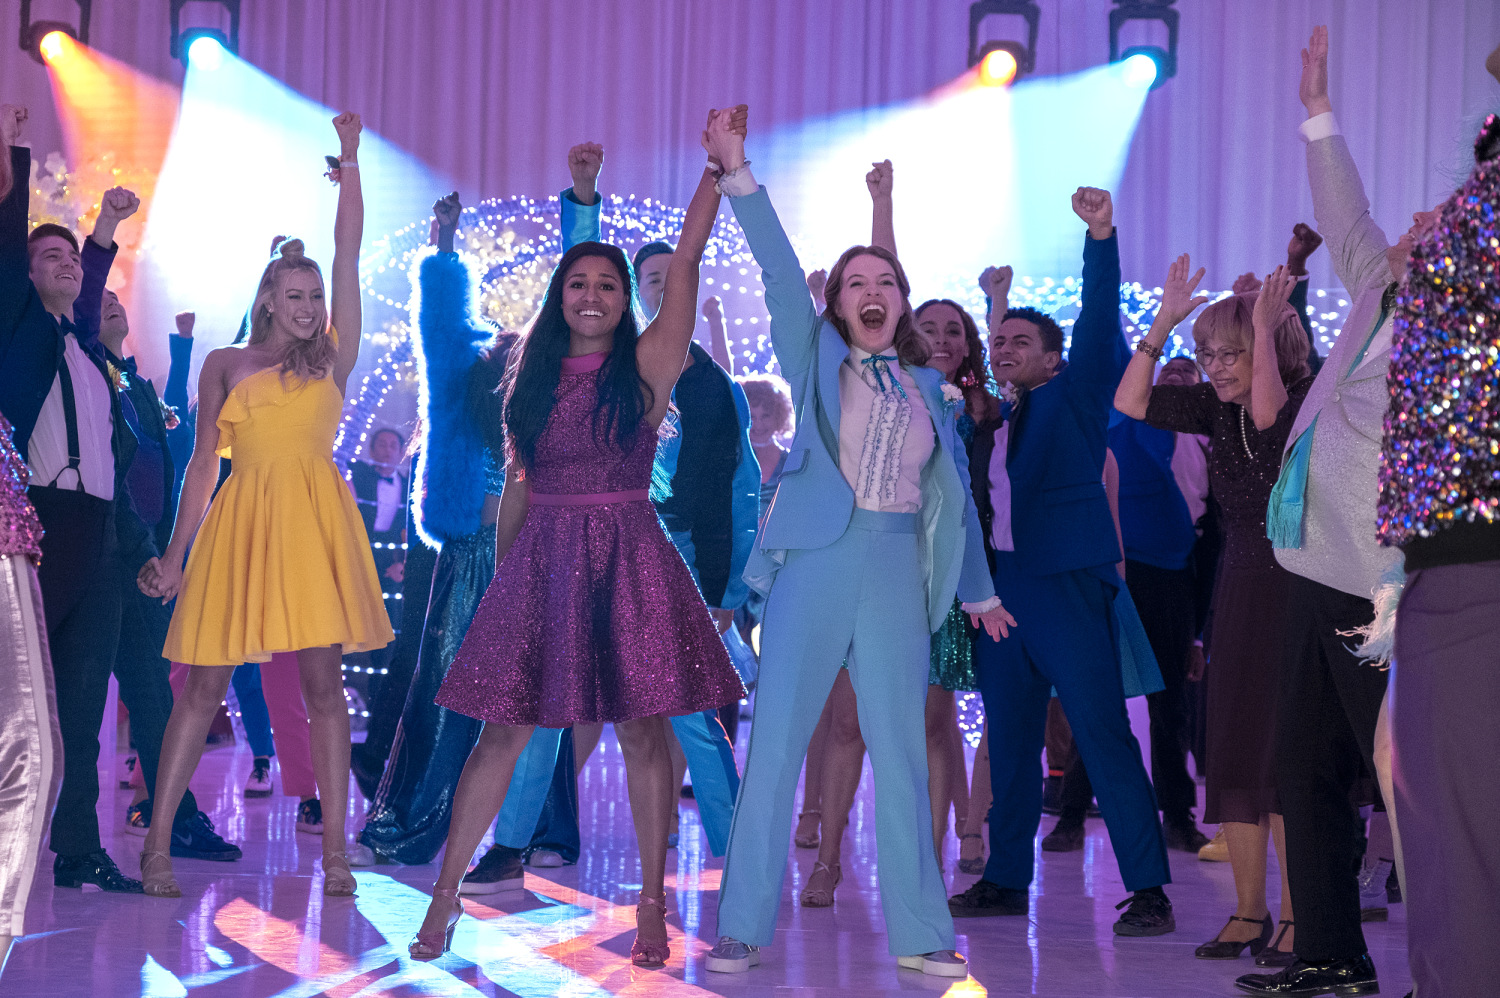 How Netflixs The Prom musical was inspired by Mike Pence